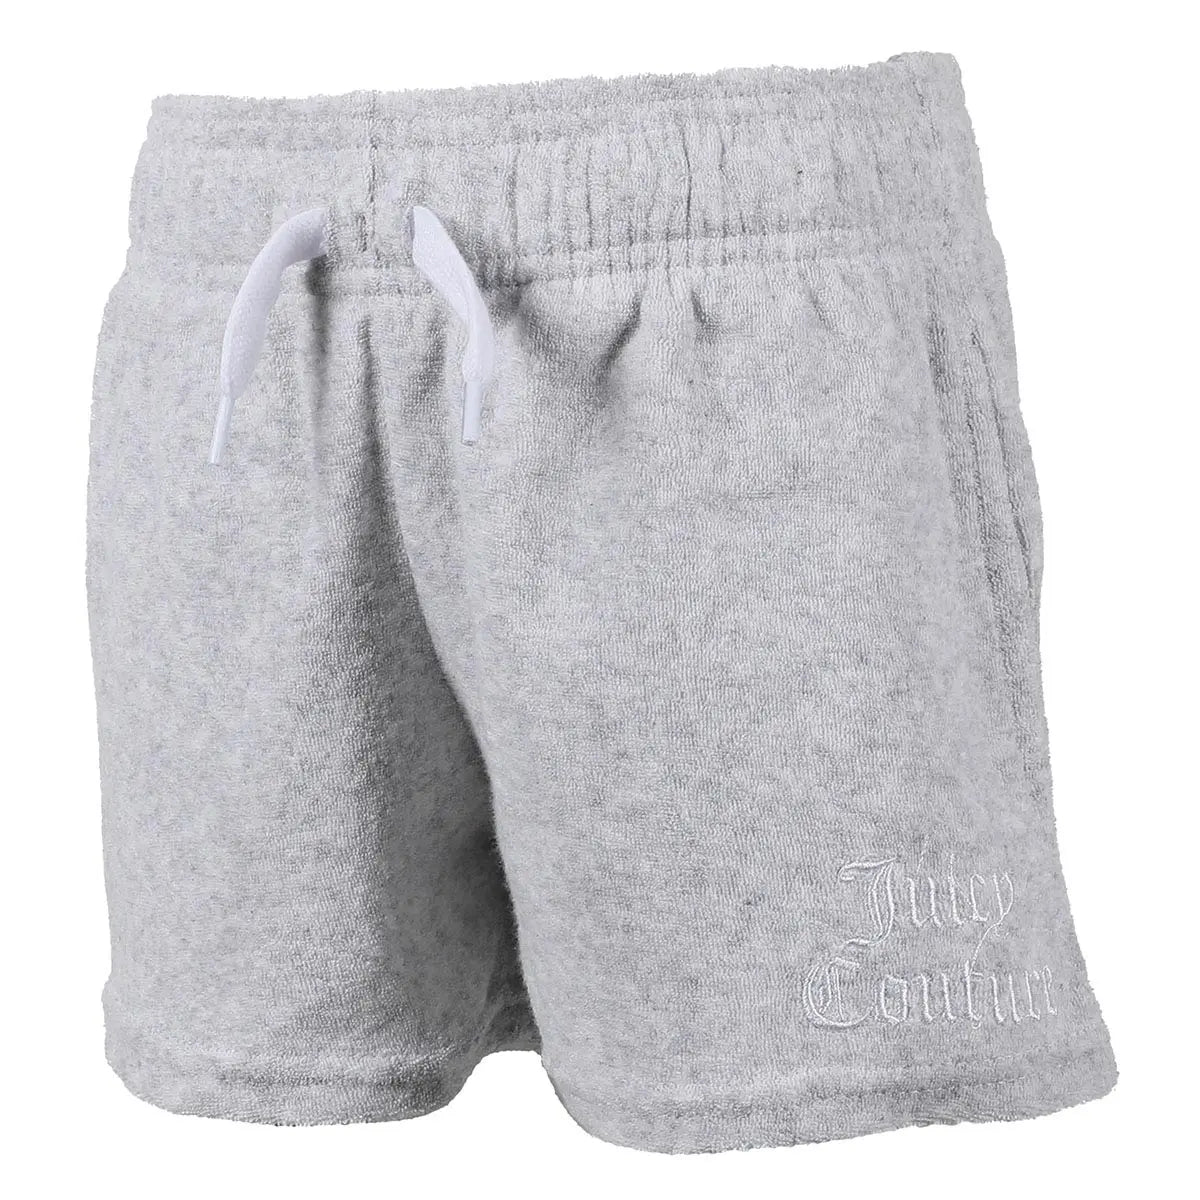 Juicy Couture Big Girl's Soft Short